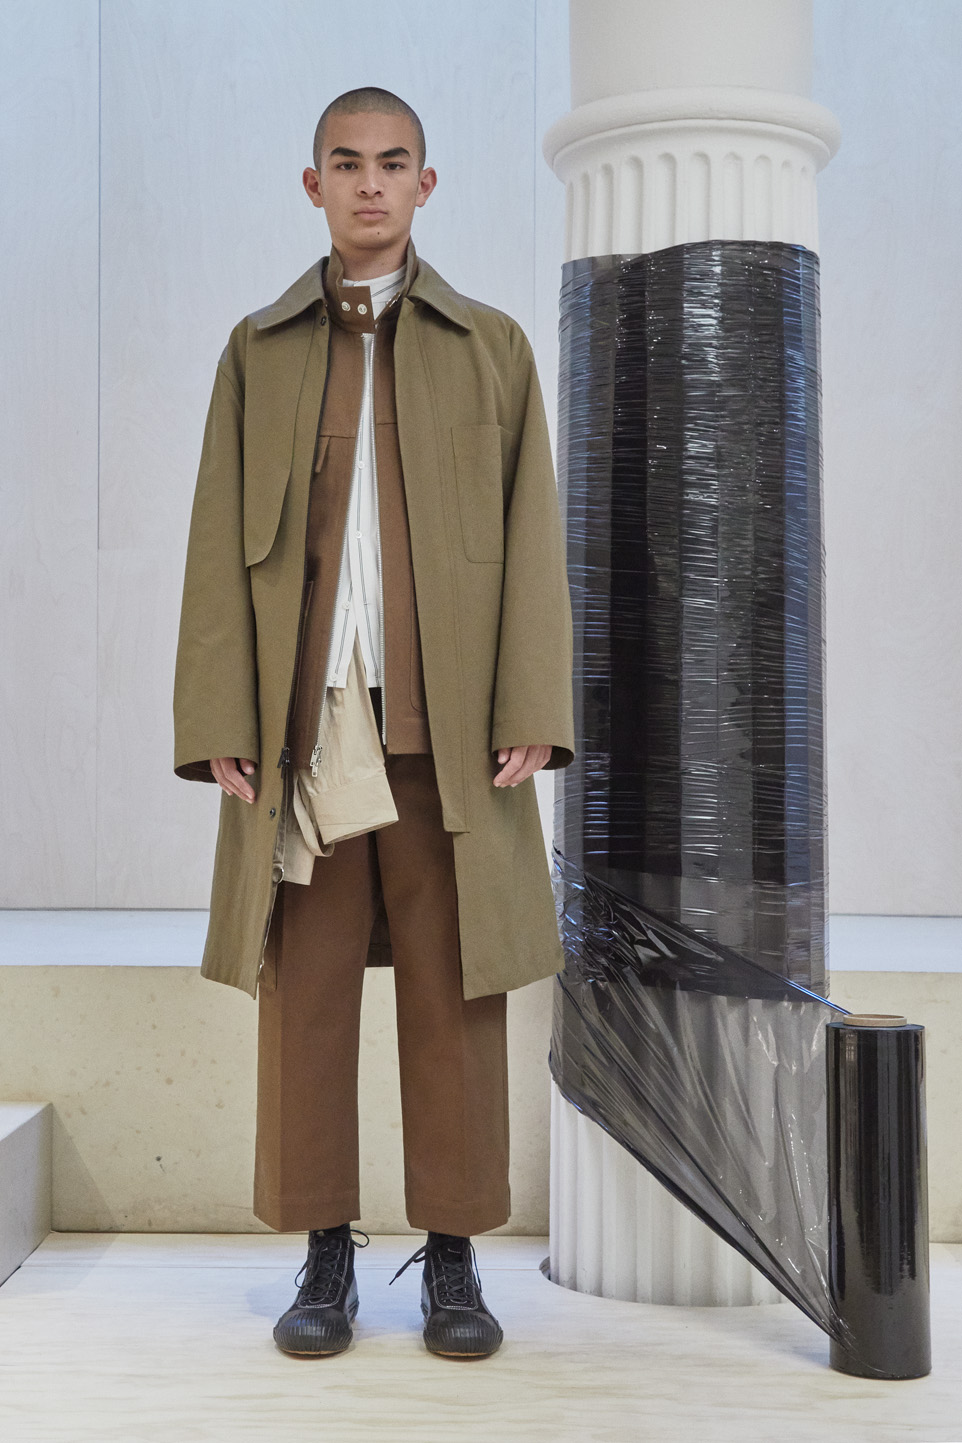 Plim FW19 Mens Collections Lores 08 3.1 phillip lim fall 2019